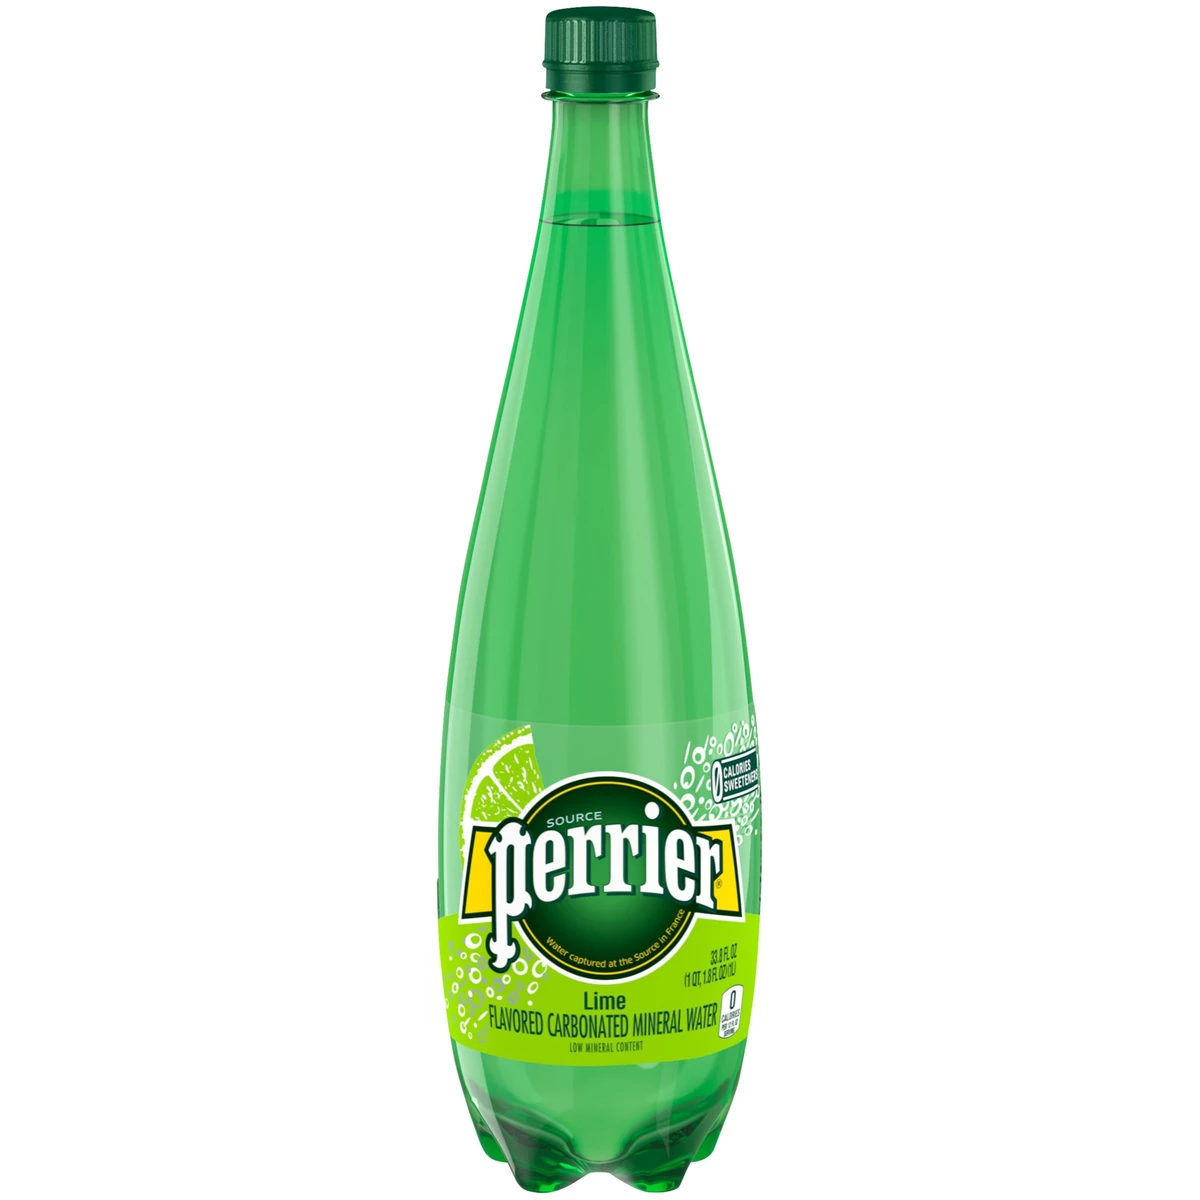 Perrier Lime Flavored Carbonated Mineral Water  33.8 fl oz Bottle